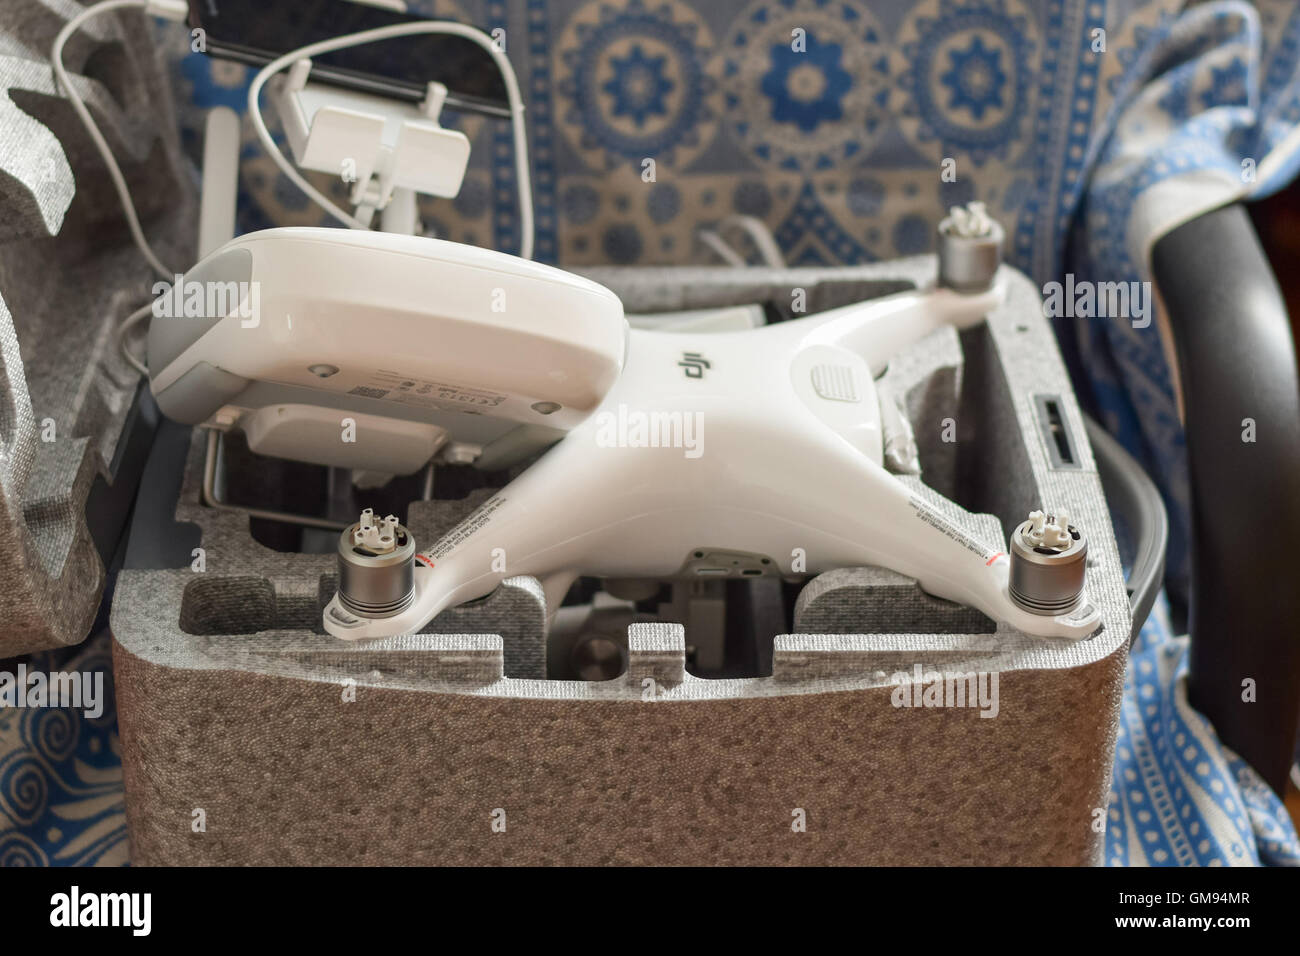 Russia, Poltavskaya village - May 1, 2016: Quadrocopters DJI Phantom 4 in its own carrying case open. Unpacking new quadrocopter Stock Photo